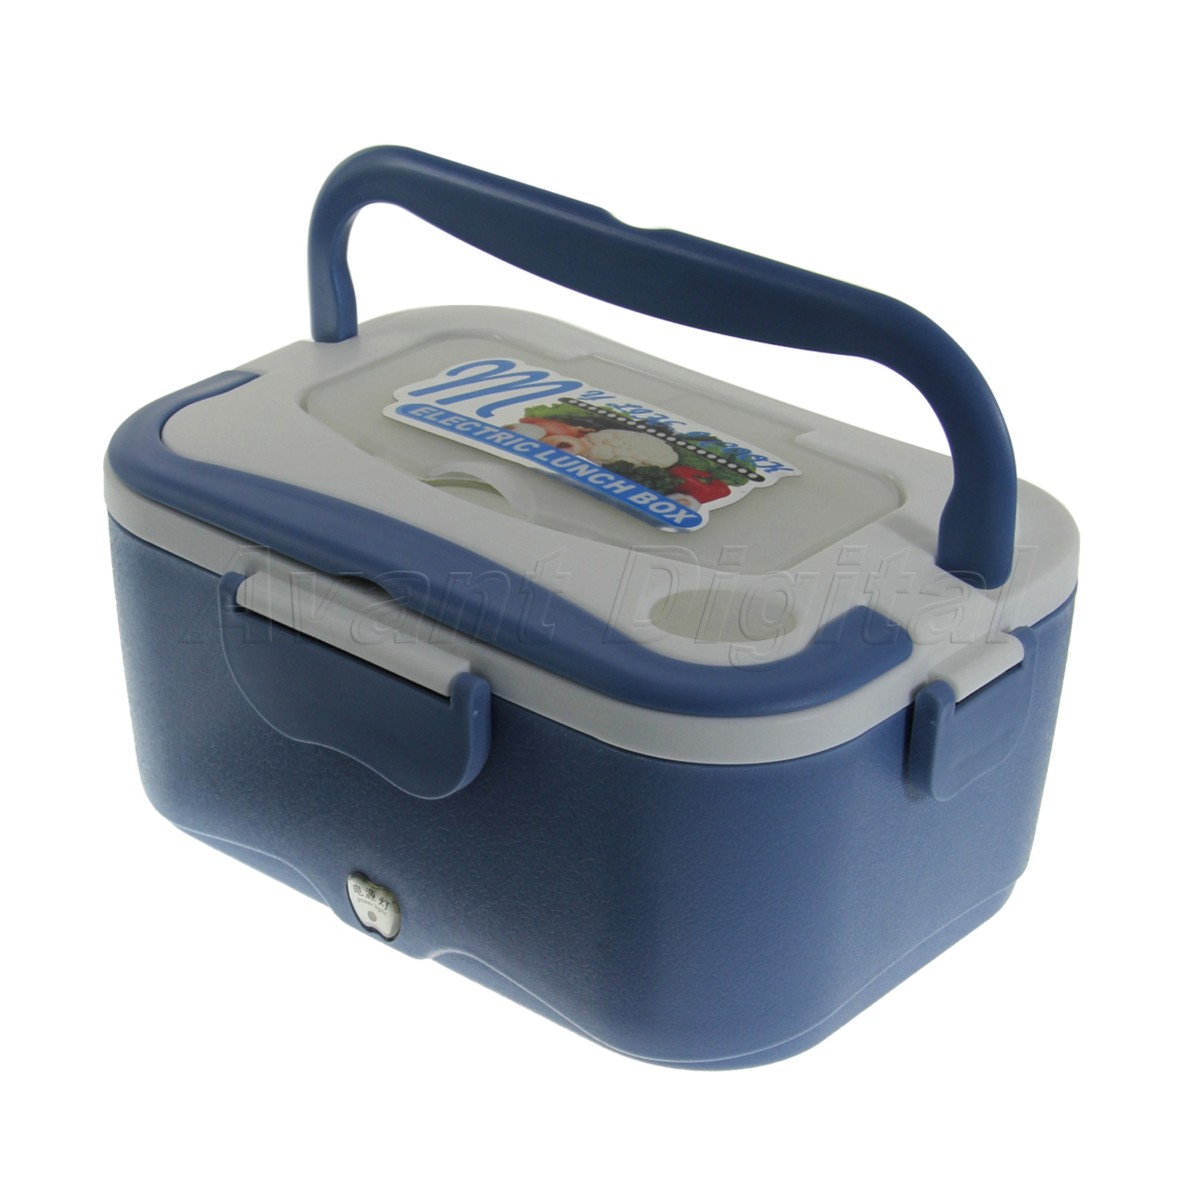 12V 45W Portable Electric Heating Lunch Box Case Mini Rice Cooker for